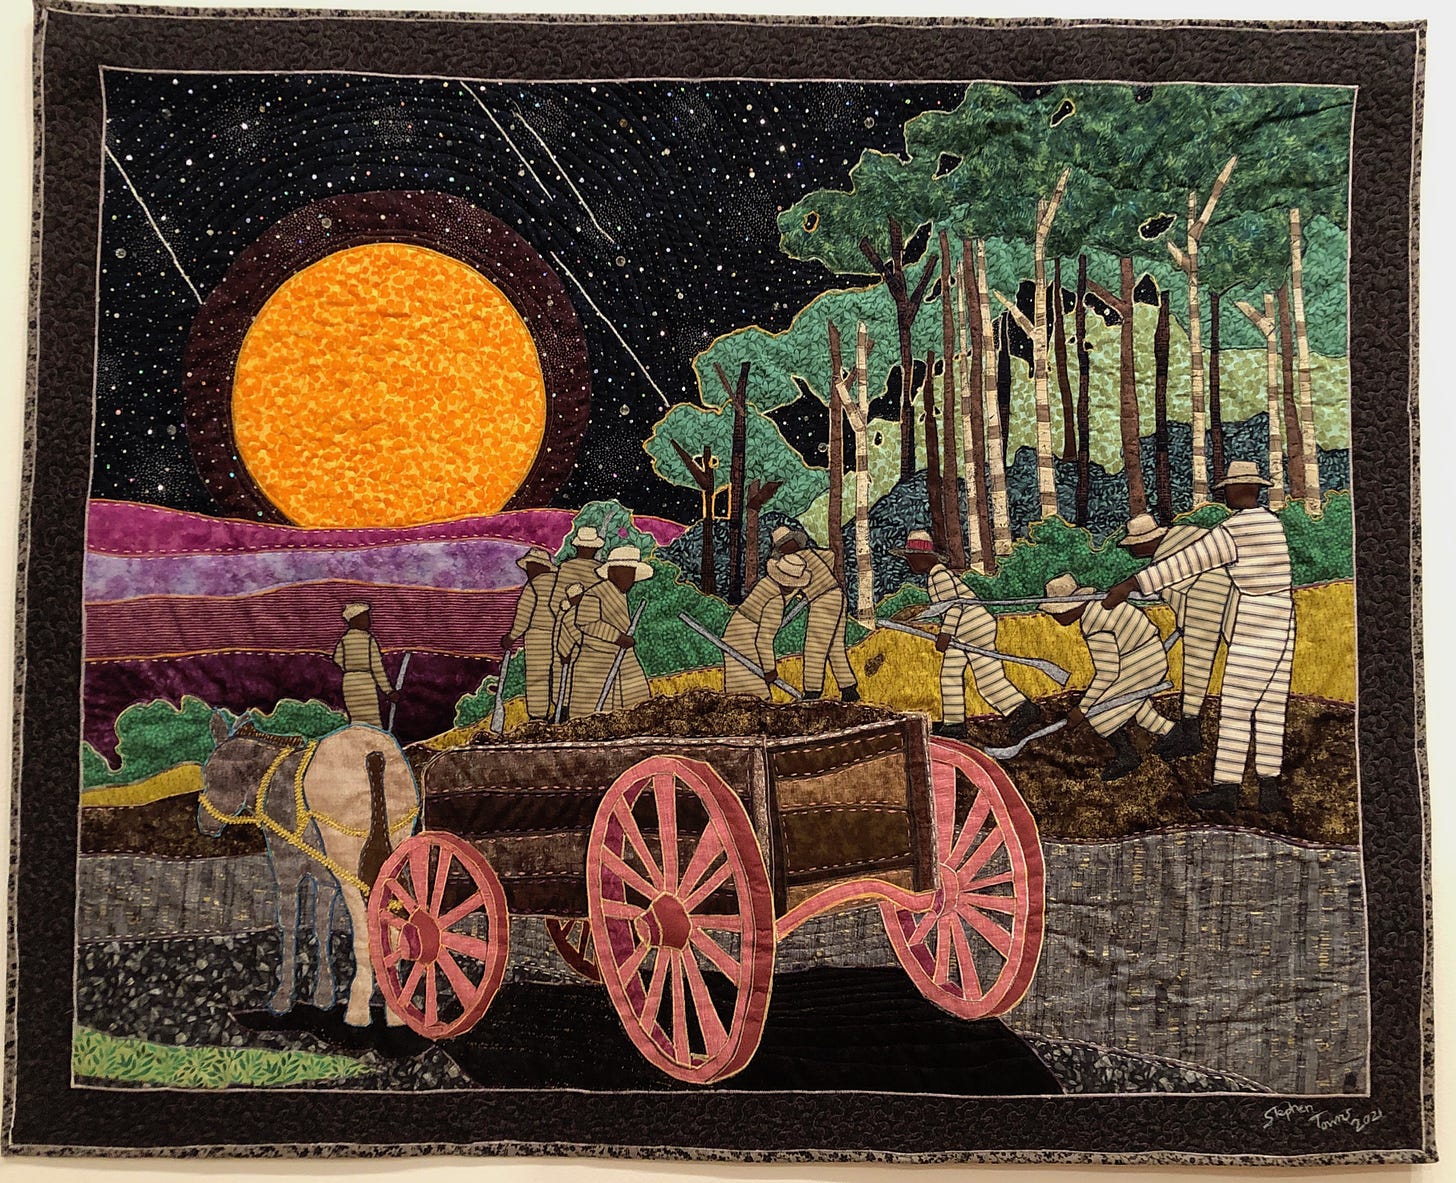 Chain gang and cart, in front of forest and an enormous moon. Stars and meteors in the sky.